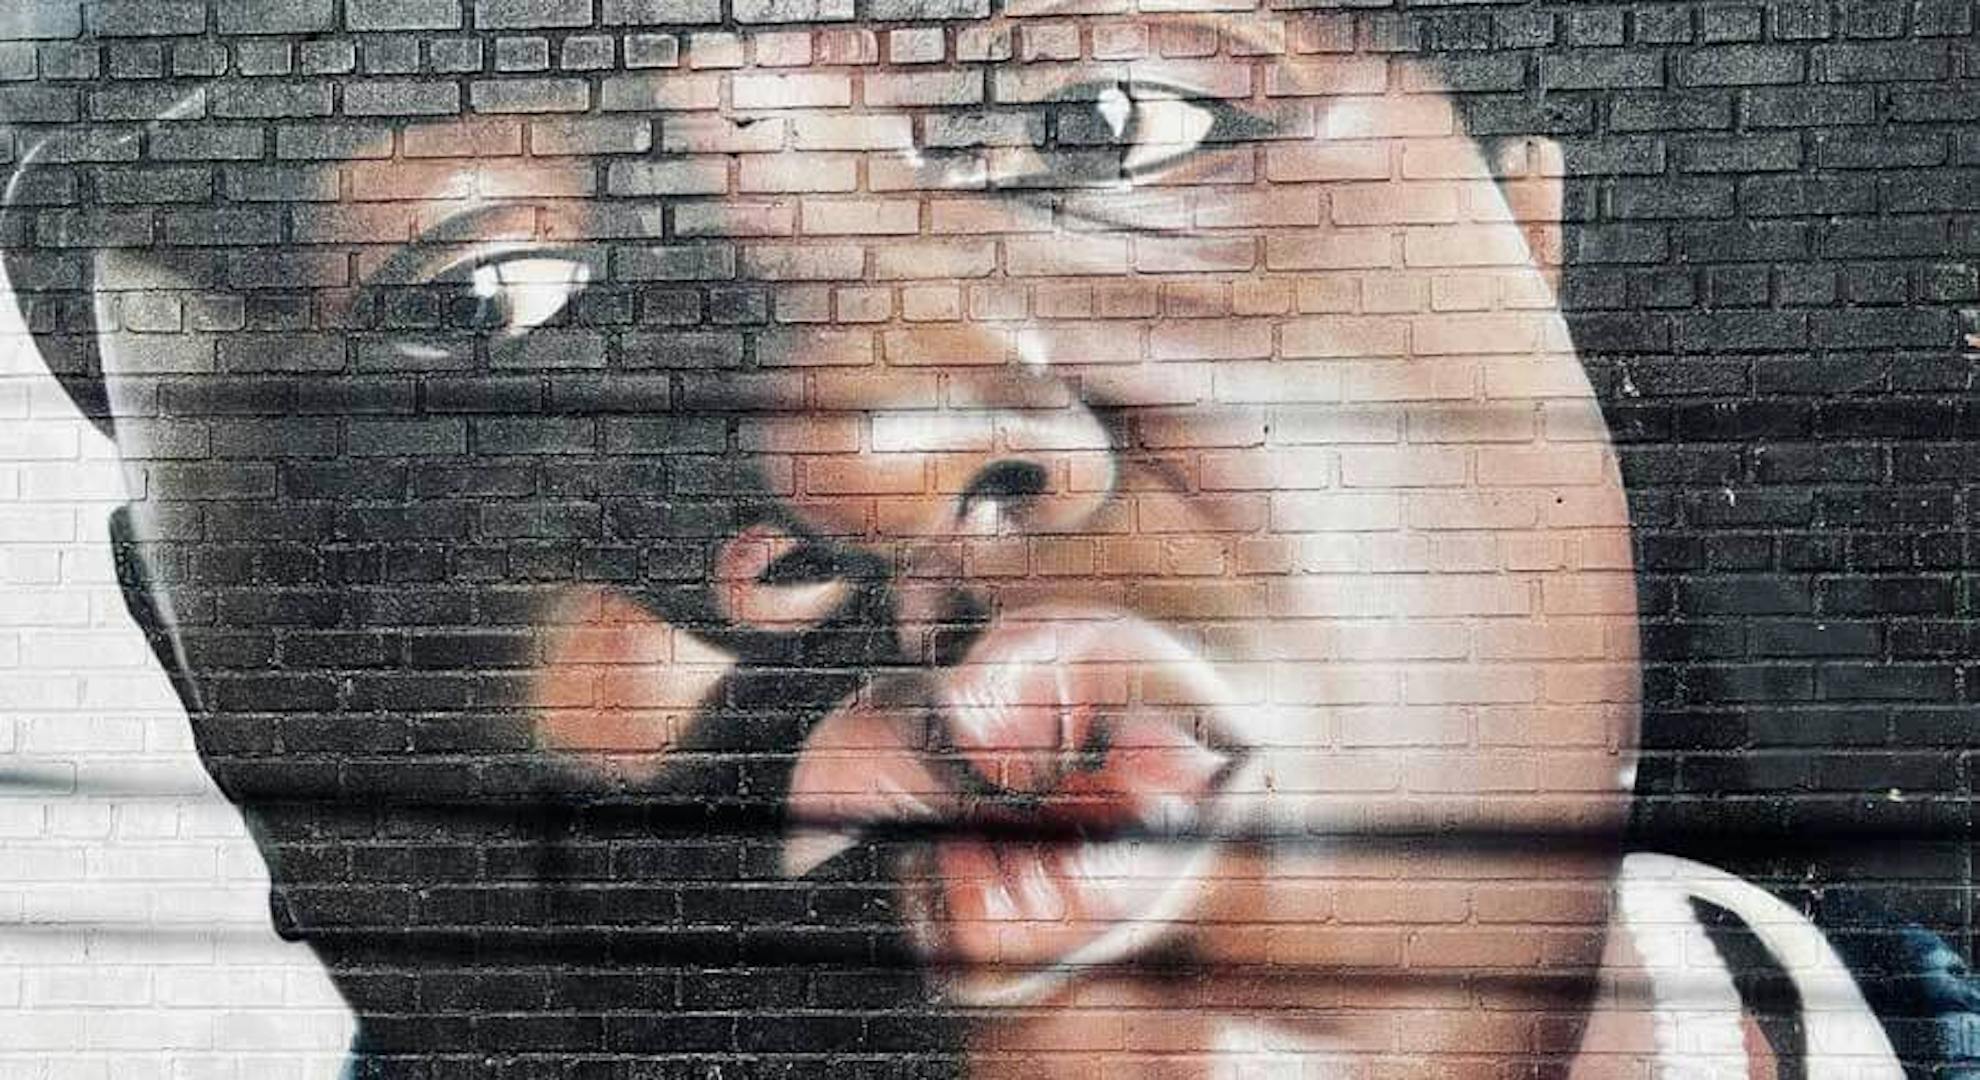 A mural of The Notorious B.I.G. on Wyckoff Ave and Troutman Street by artist Sipros.